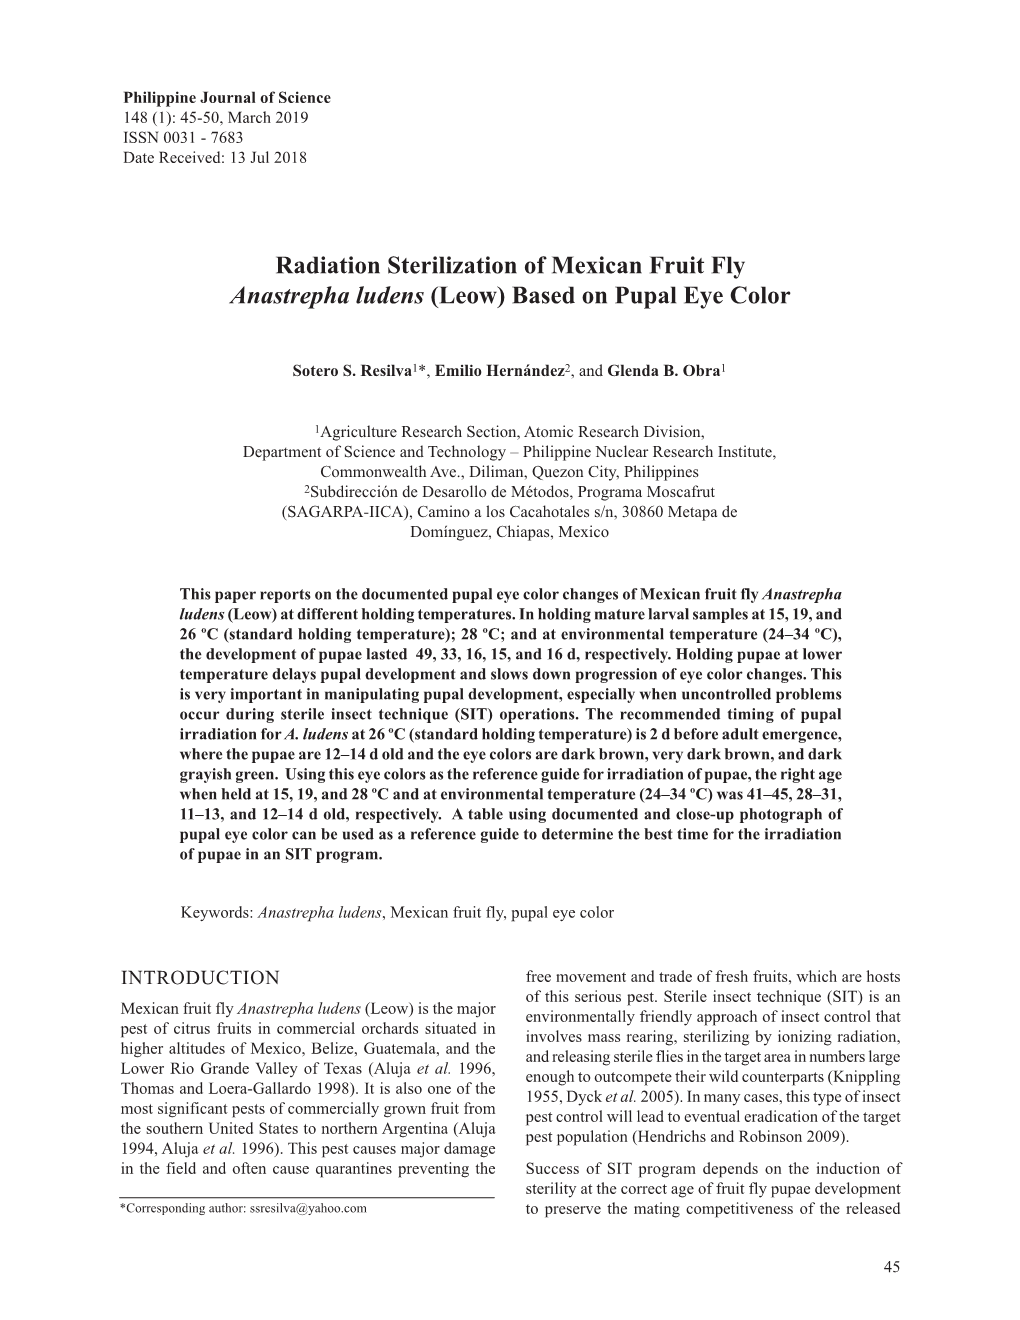 Radiation Sterilization of Mexican Fruit Fly Anastrepha Ludens (Leow) Based on Pupal Eye Color